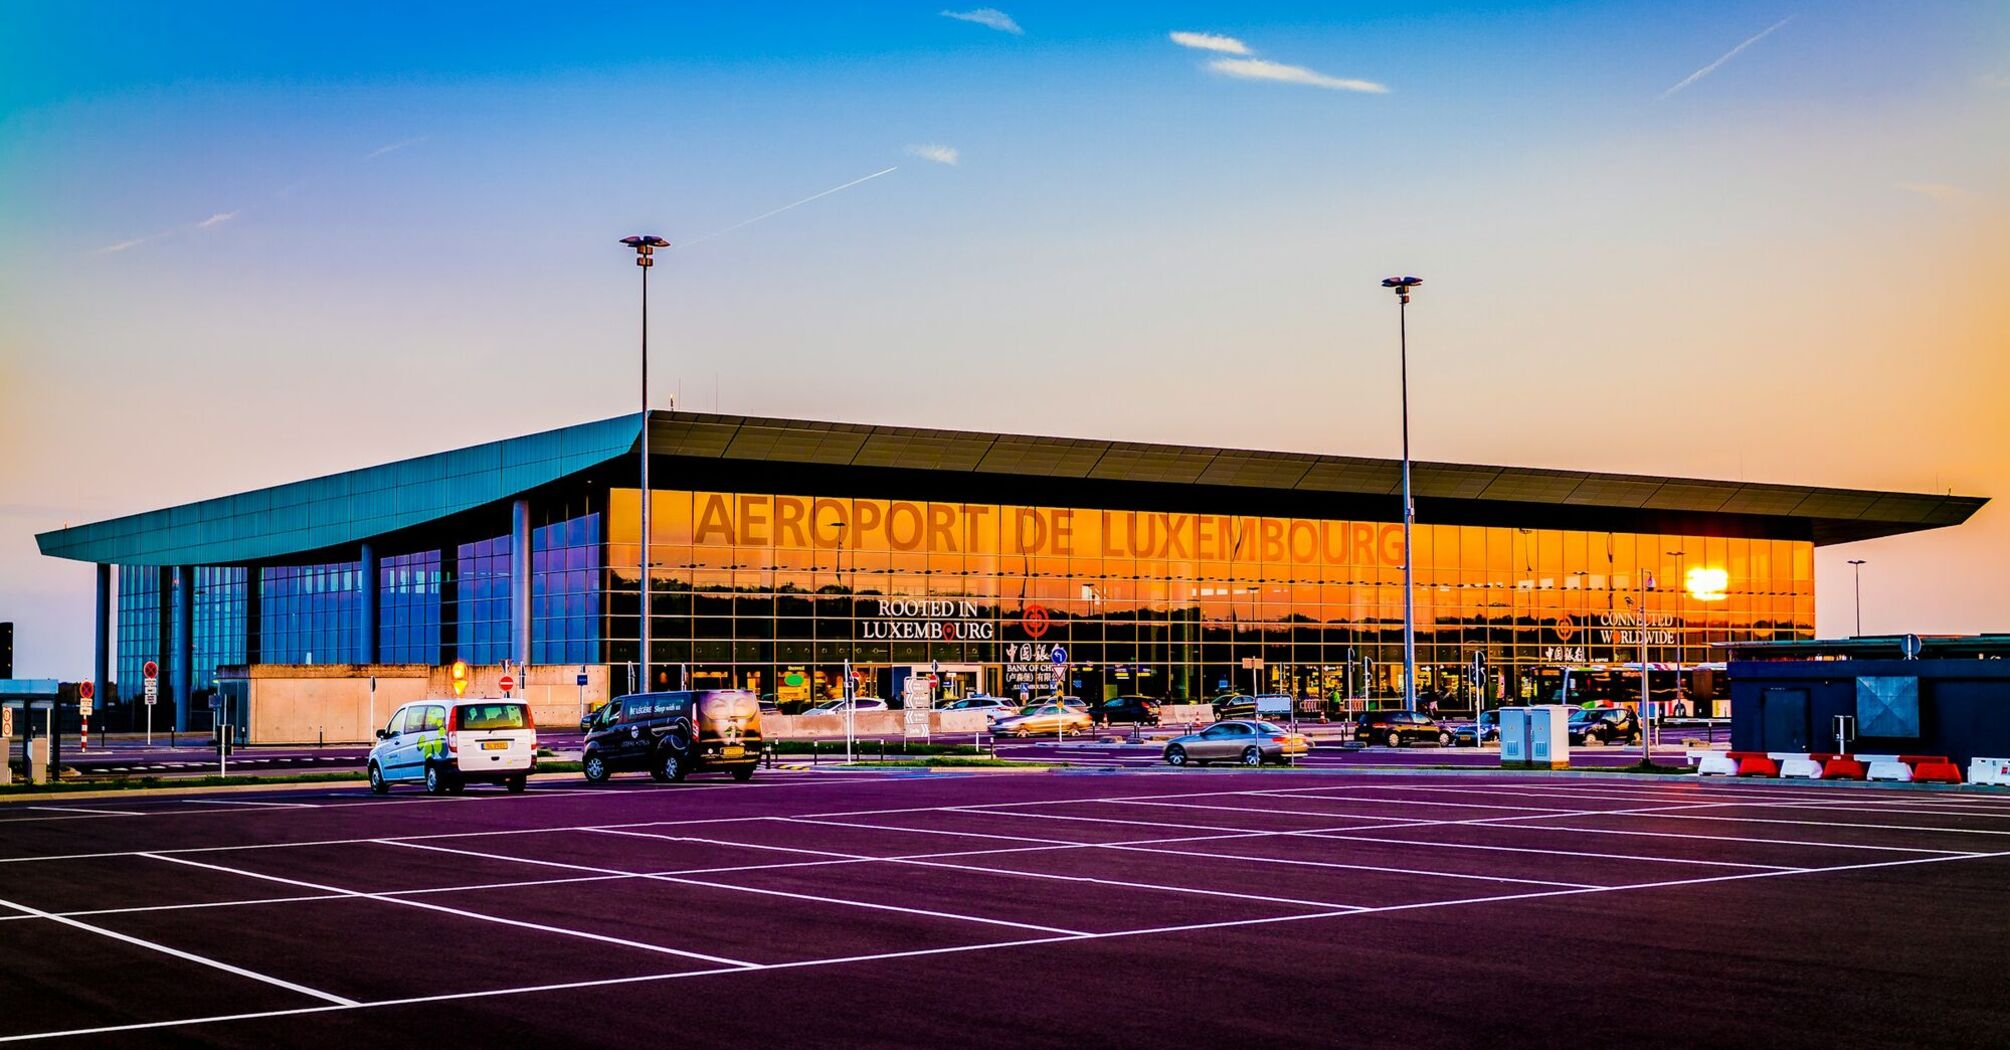 Luxembourg Airport terminal building at sunset